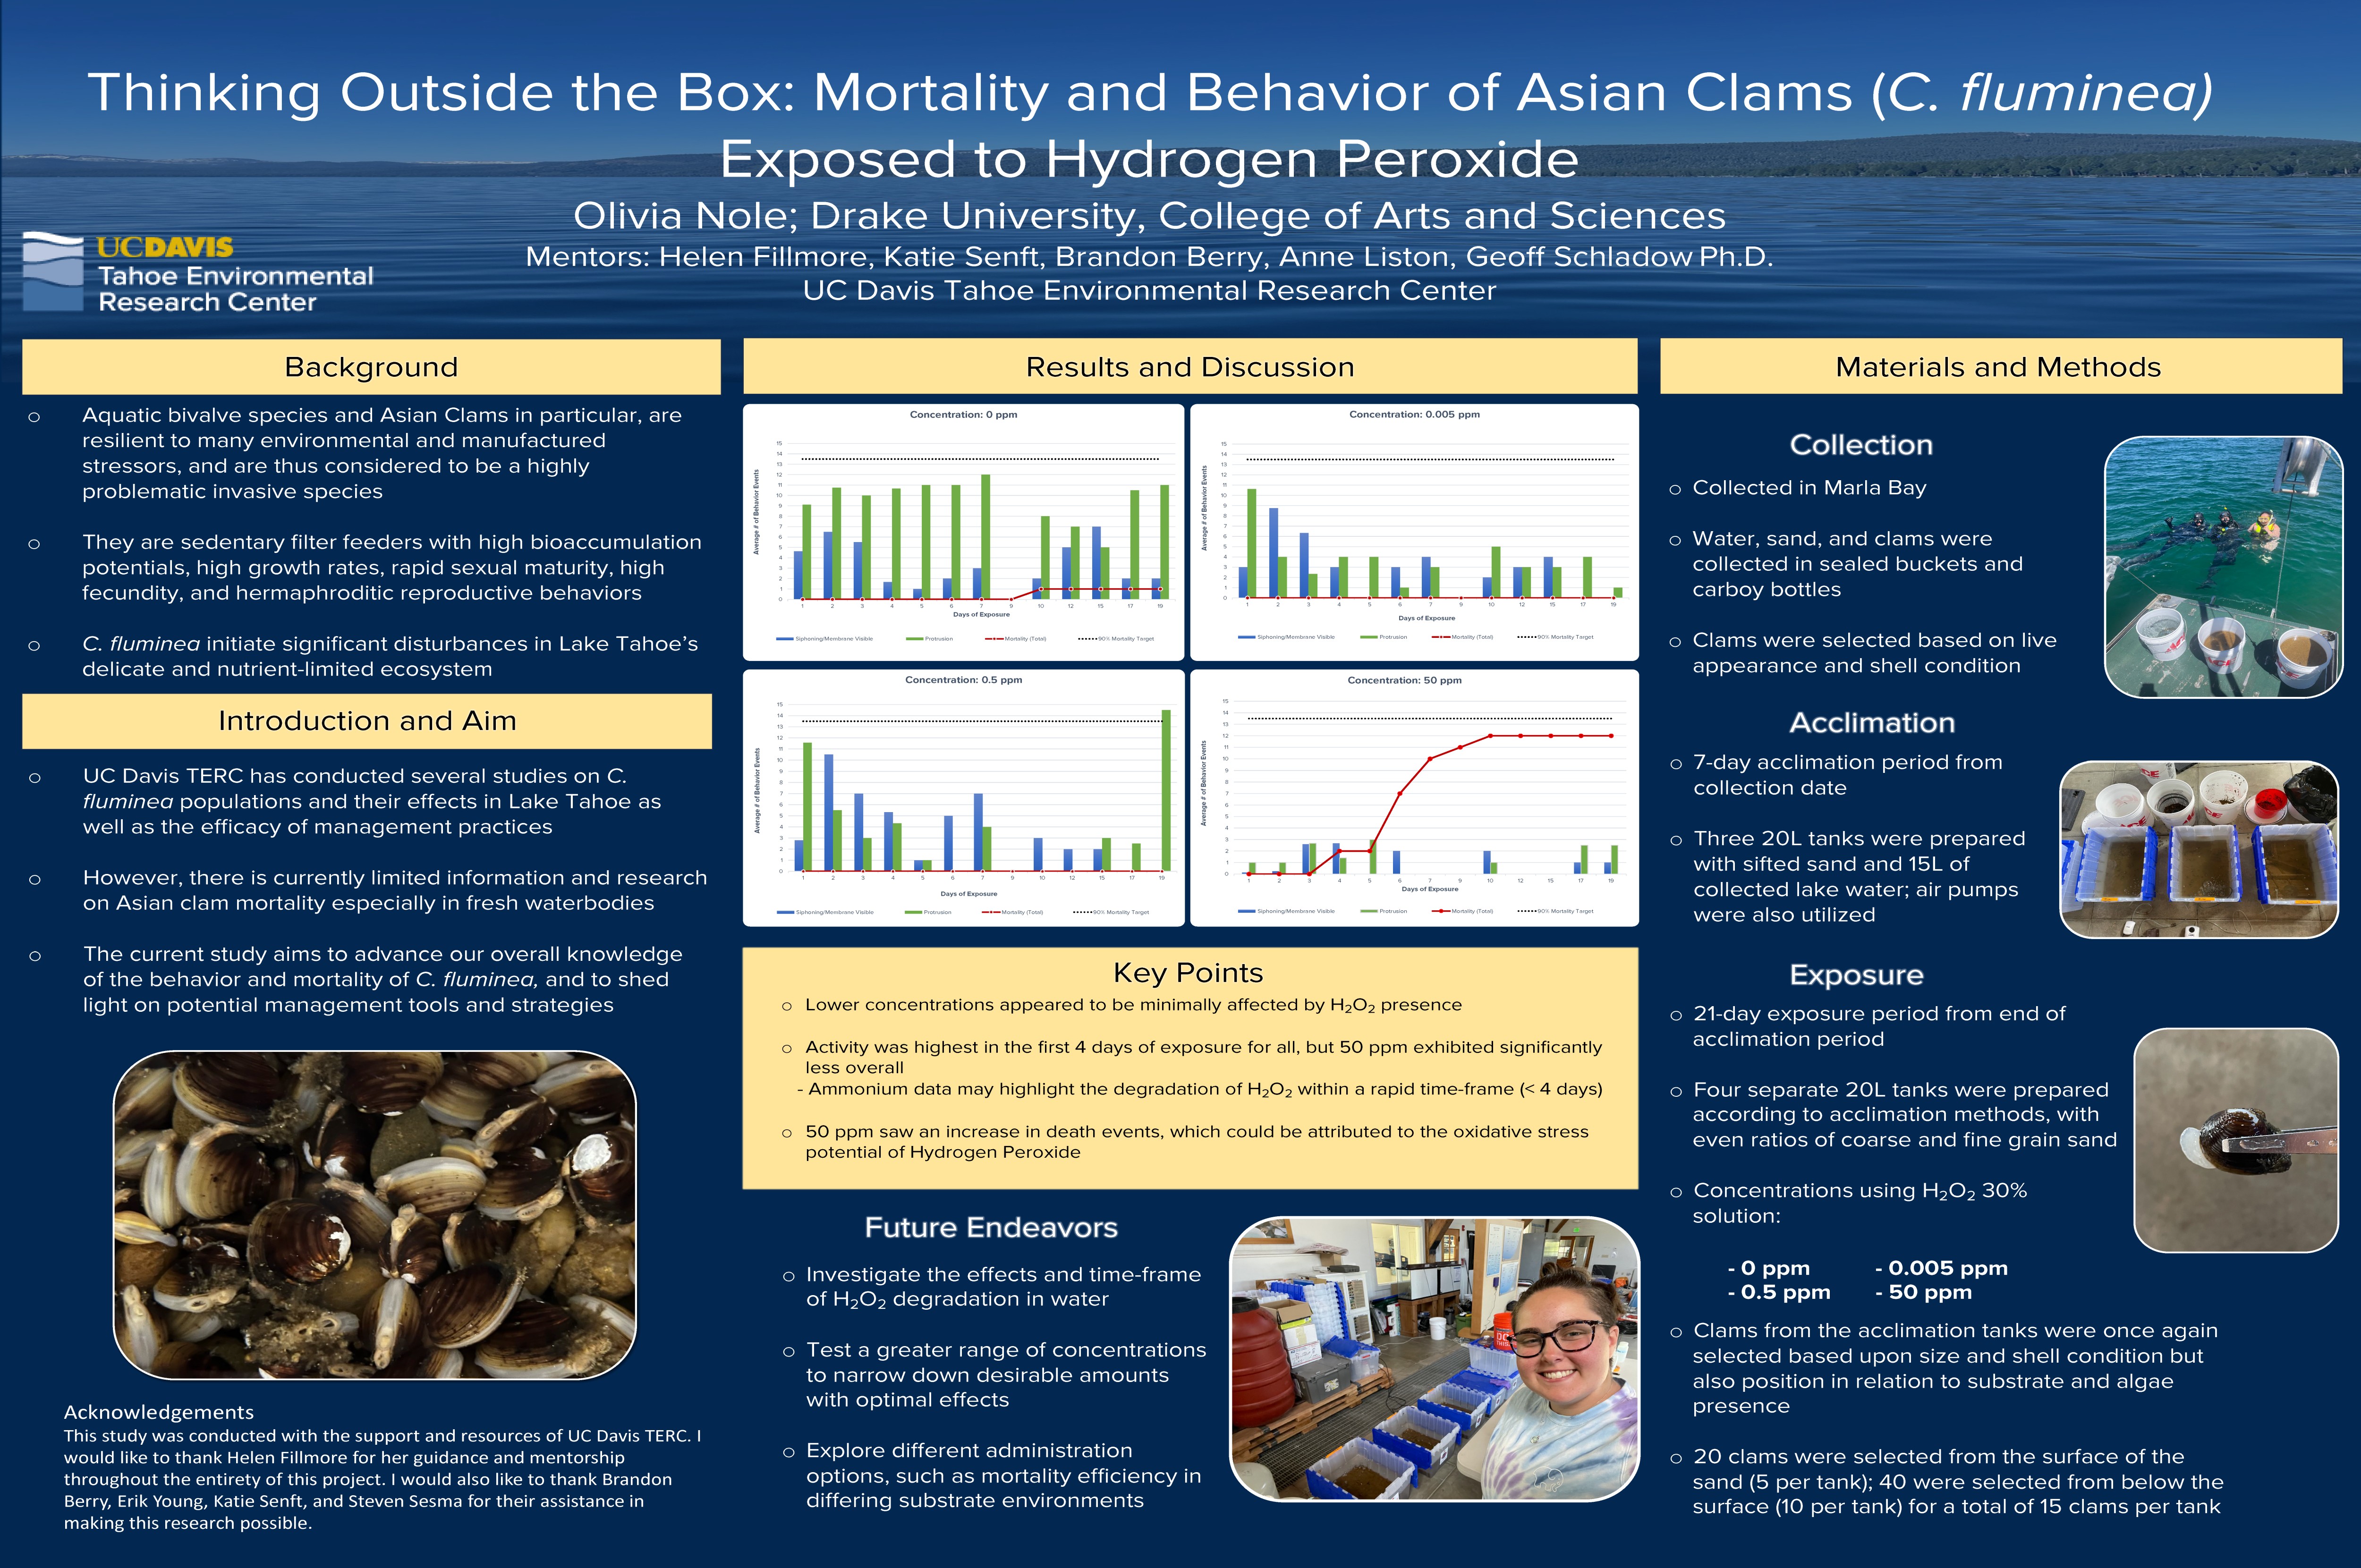 Mortality and Behavior of Asian Clams Exposed to Hydrogen Peroxide